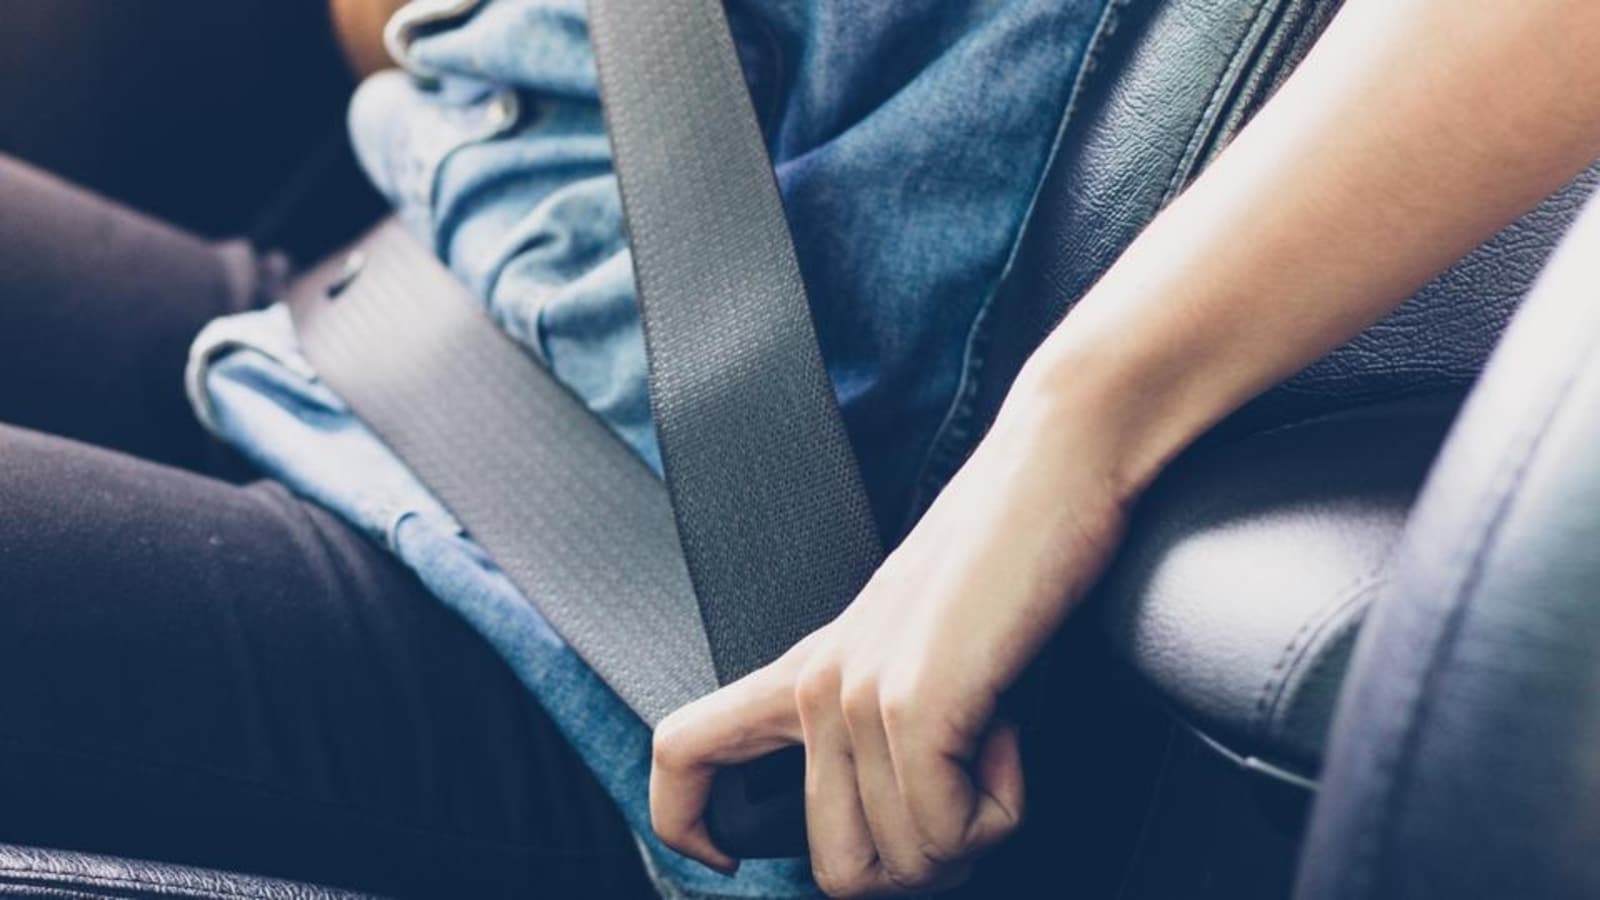 Karnataka police to fine ₹1,000 to those who do not wear rear seat belts in cars